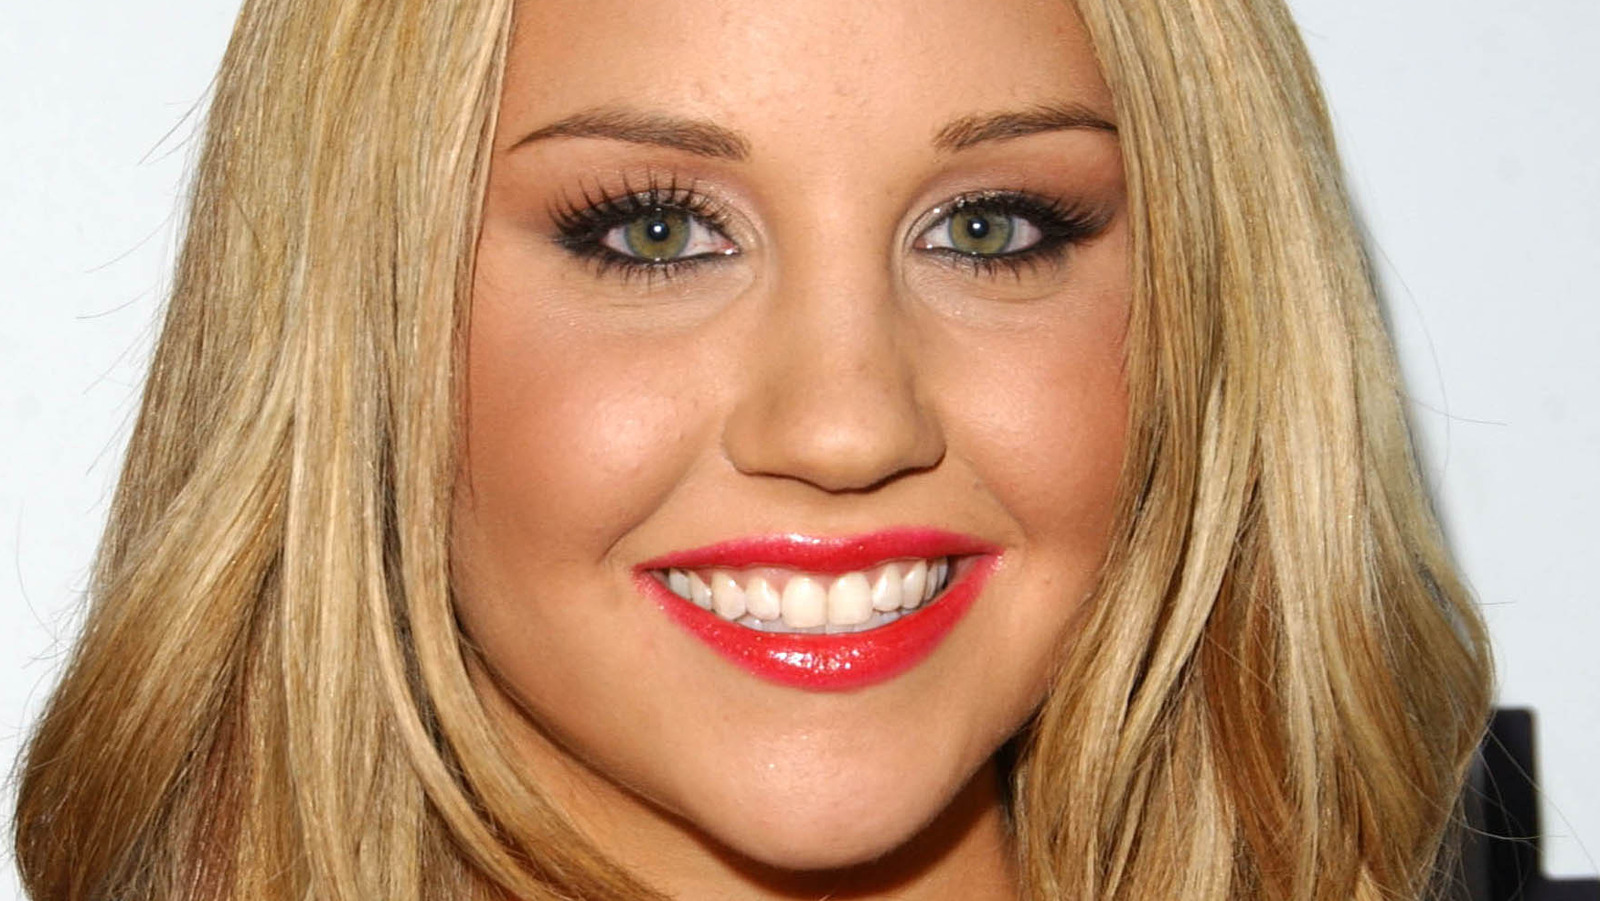 amanda bynes relationship with her parents has been strained for years